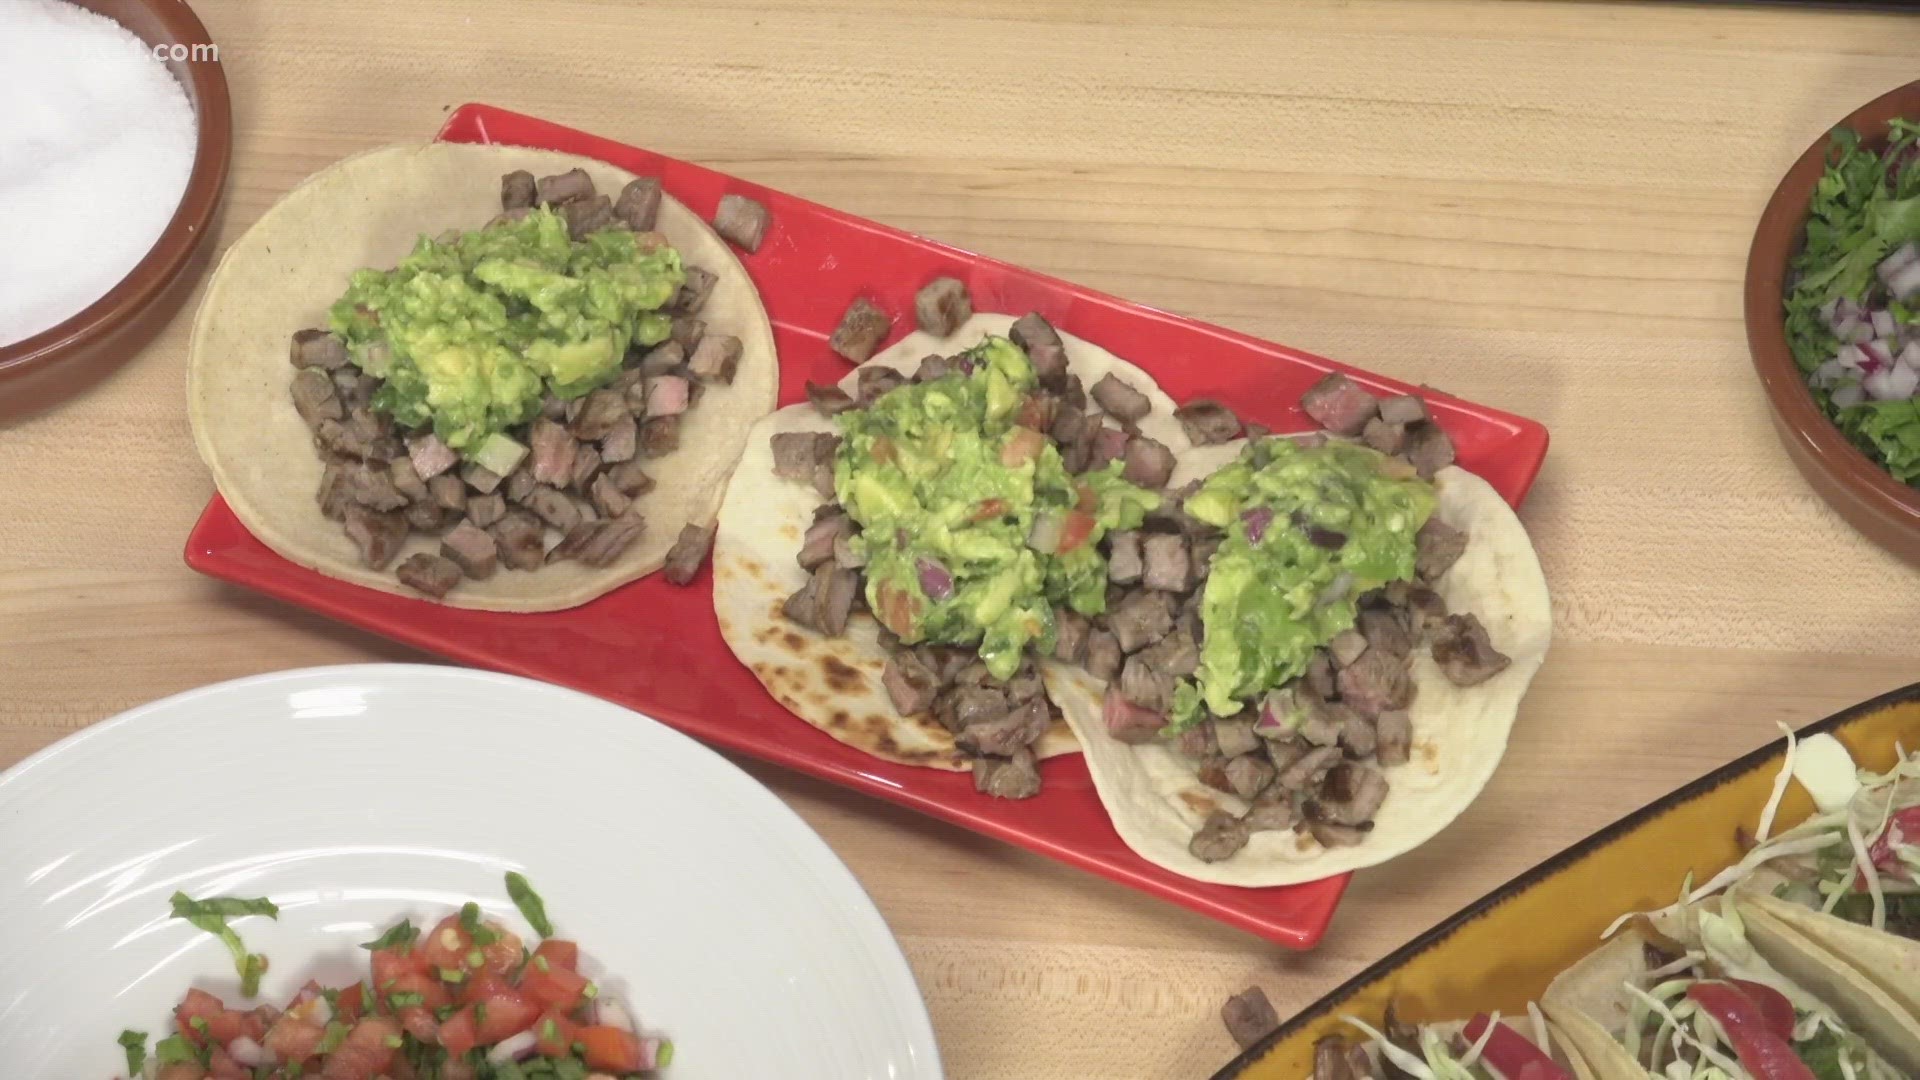 Chef Manuel with Rosa Mexicano shows us how to assemble the restaurant's New York strip steak taco as well as a margarita that they plan on serving on Cinco de Mayo.